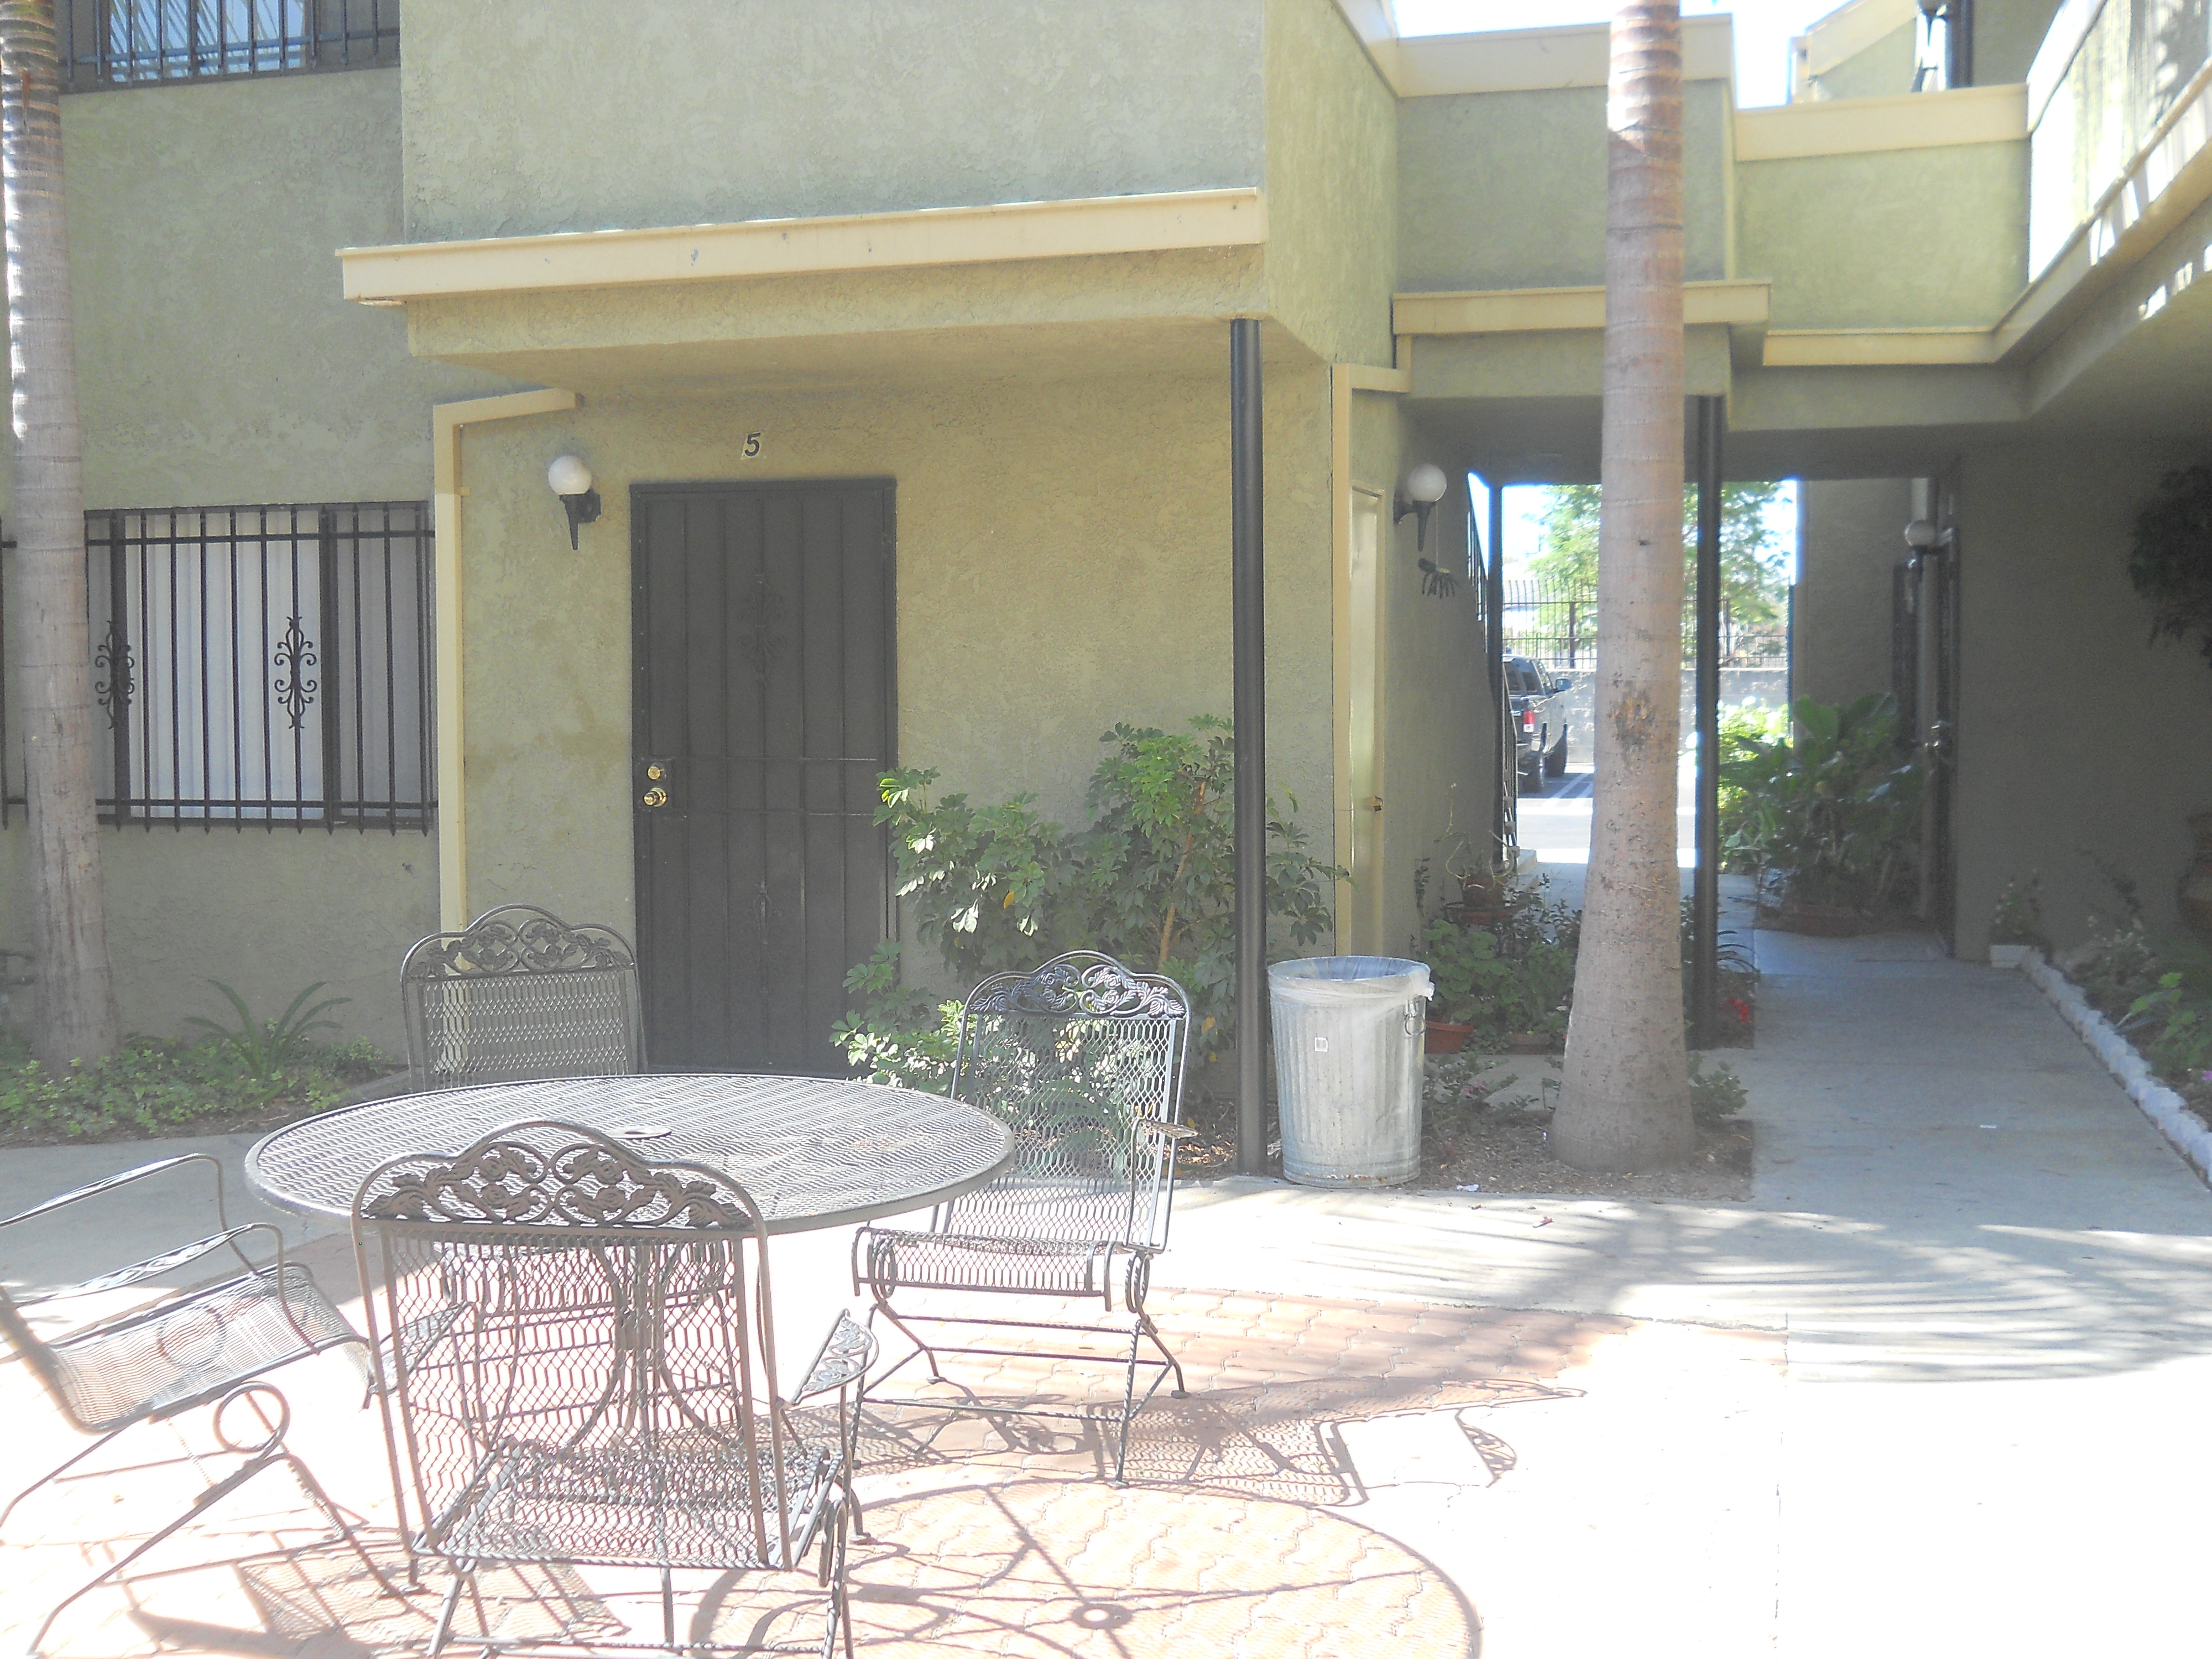 Nyumba Apartments, outside patio with a wrought iron patio table with four chairs, visible is a unit with a wrought iron door and parking area.